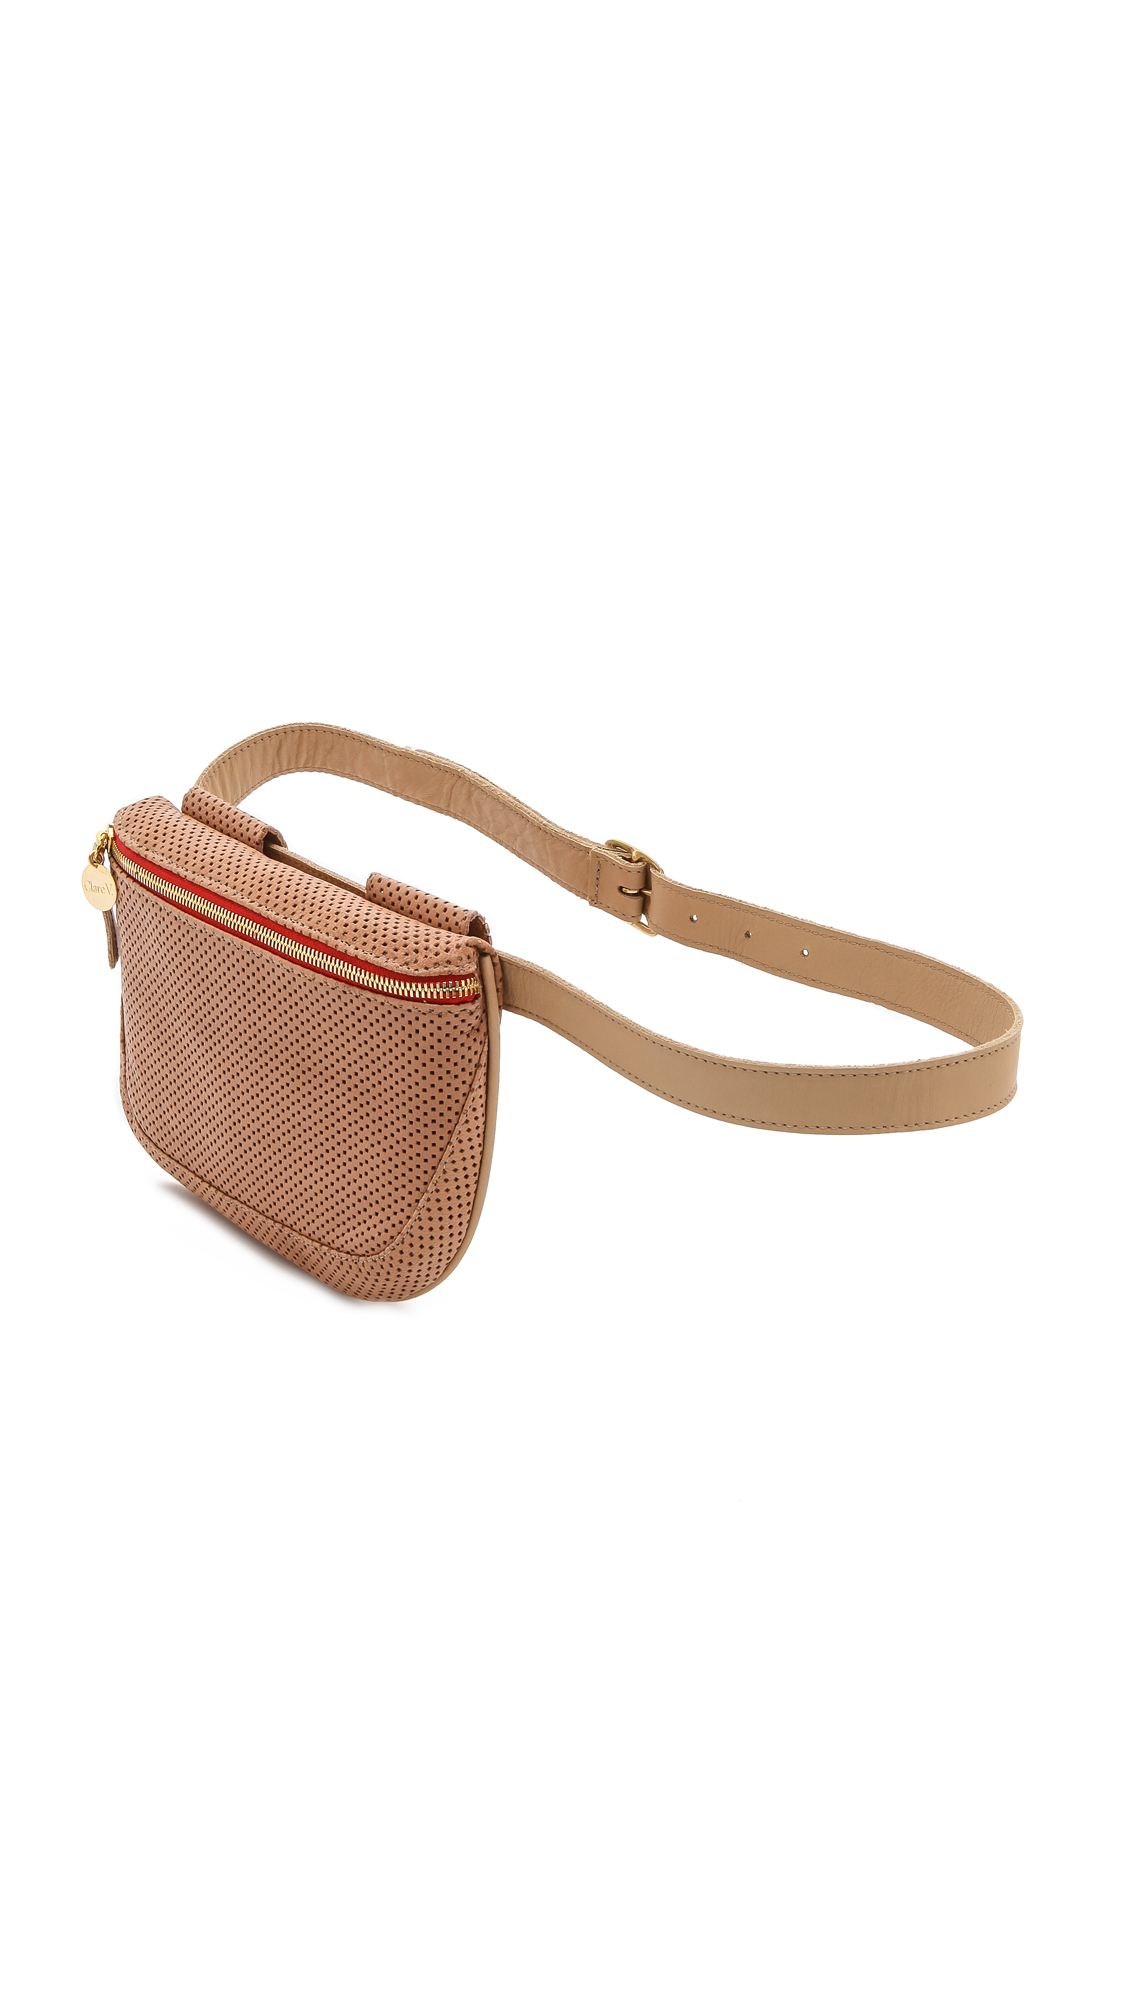 Lyst - Clare V. Supreme Fanny Pack Tan in Brown